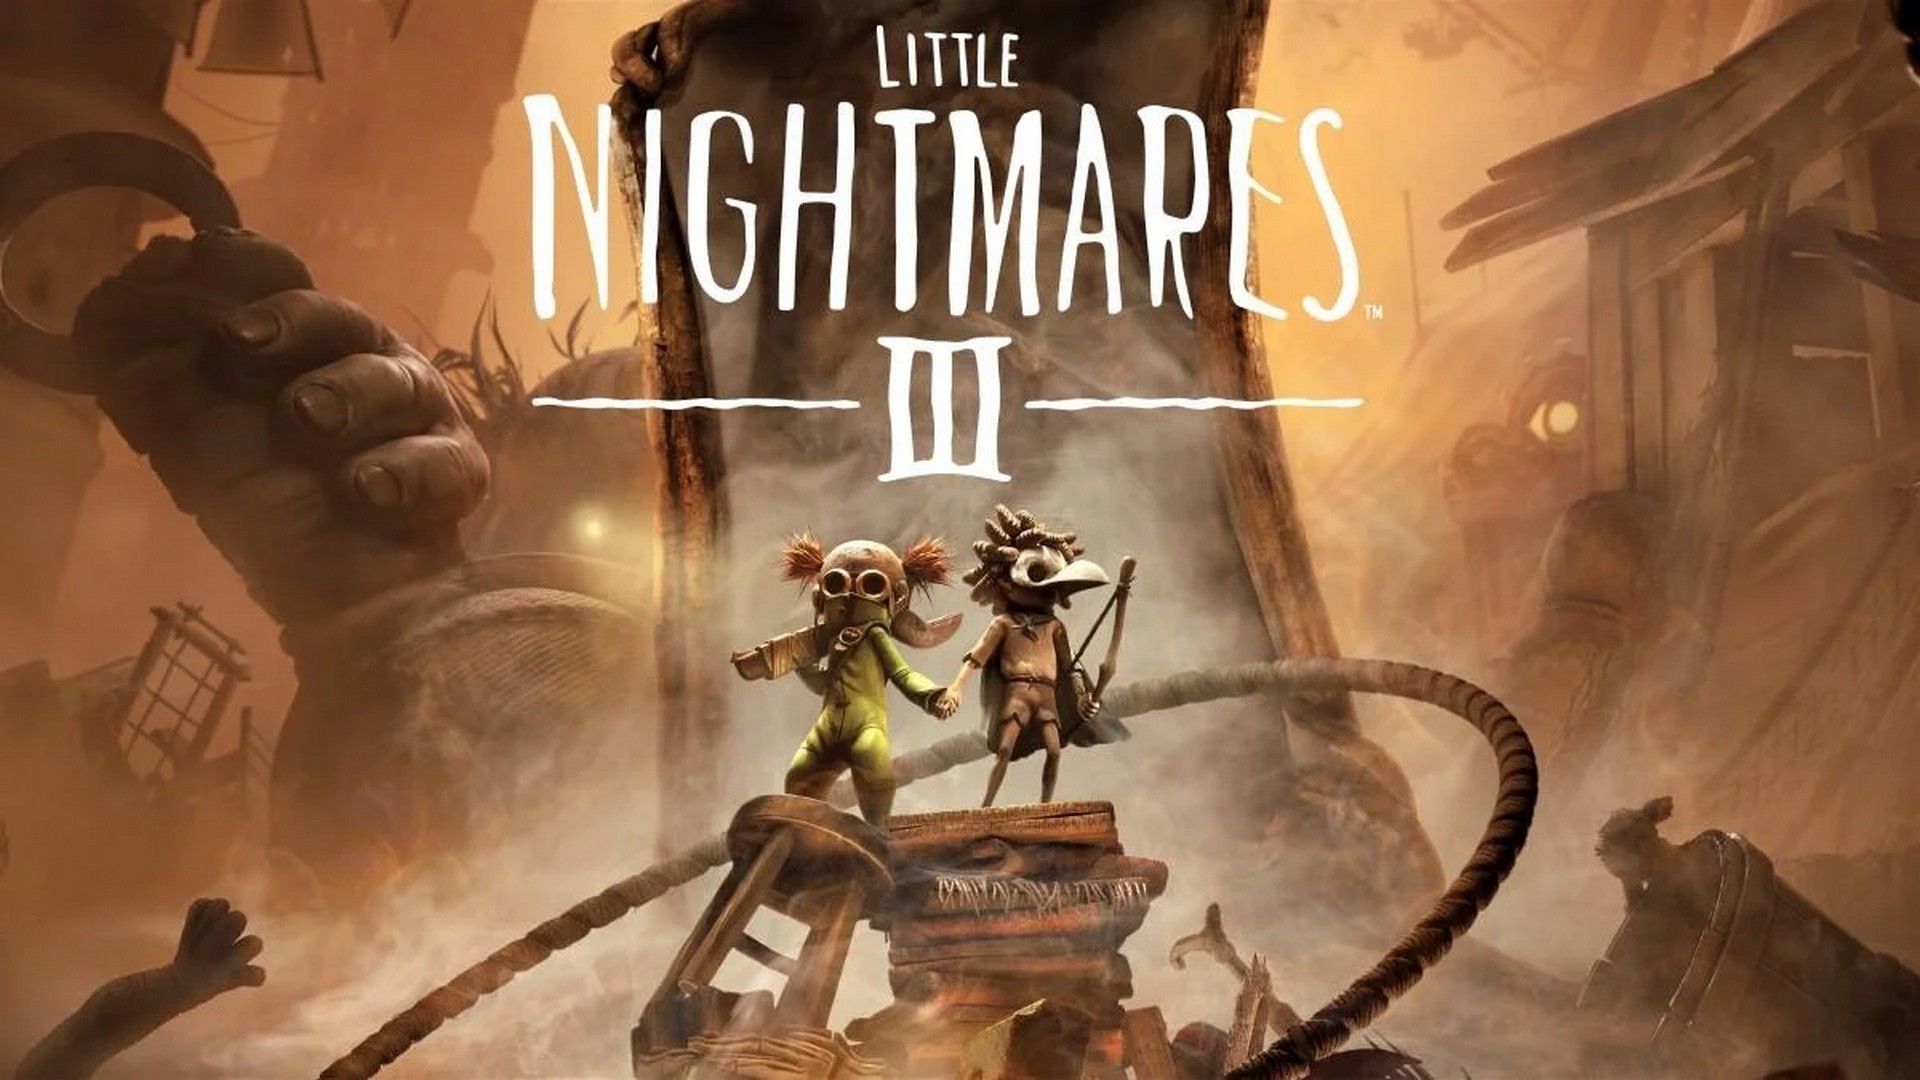 Discover More Little Nightmares III Secrets In This New Co-Op Gameplay  Video